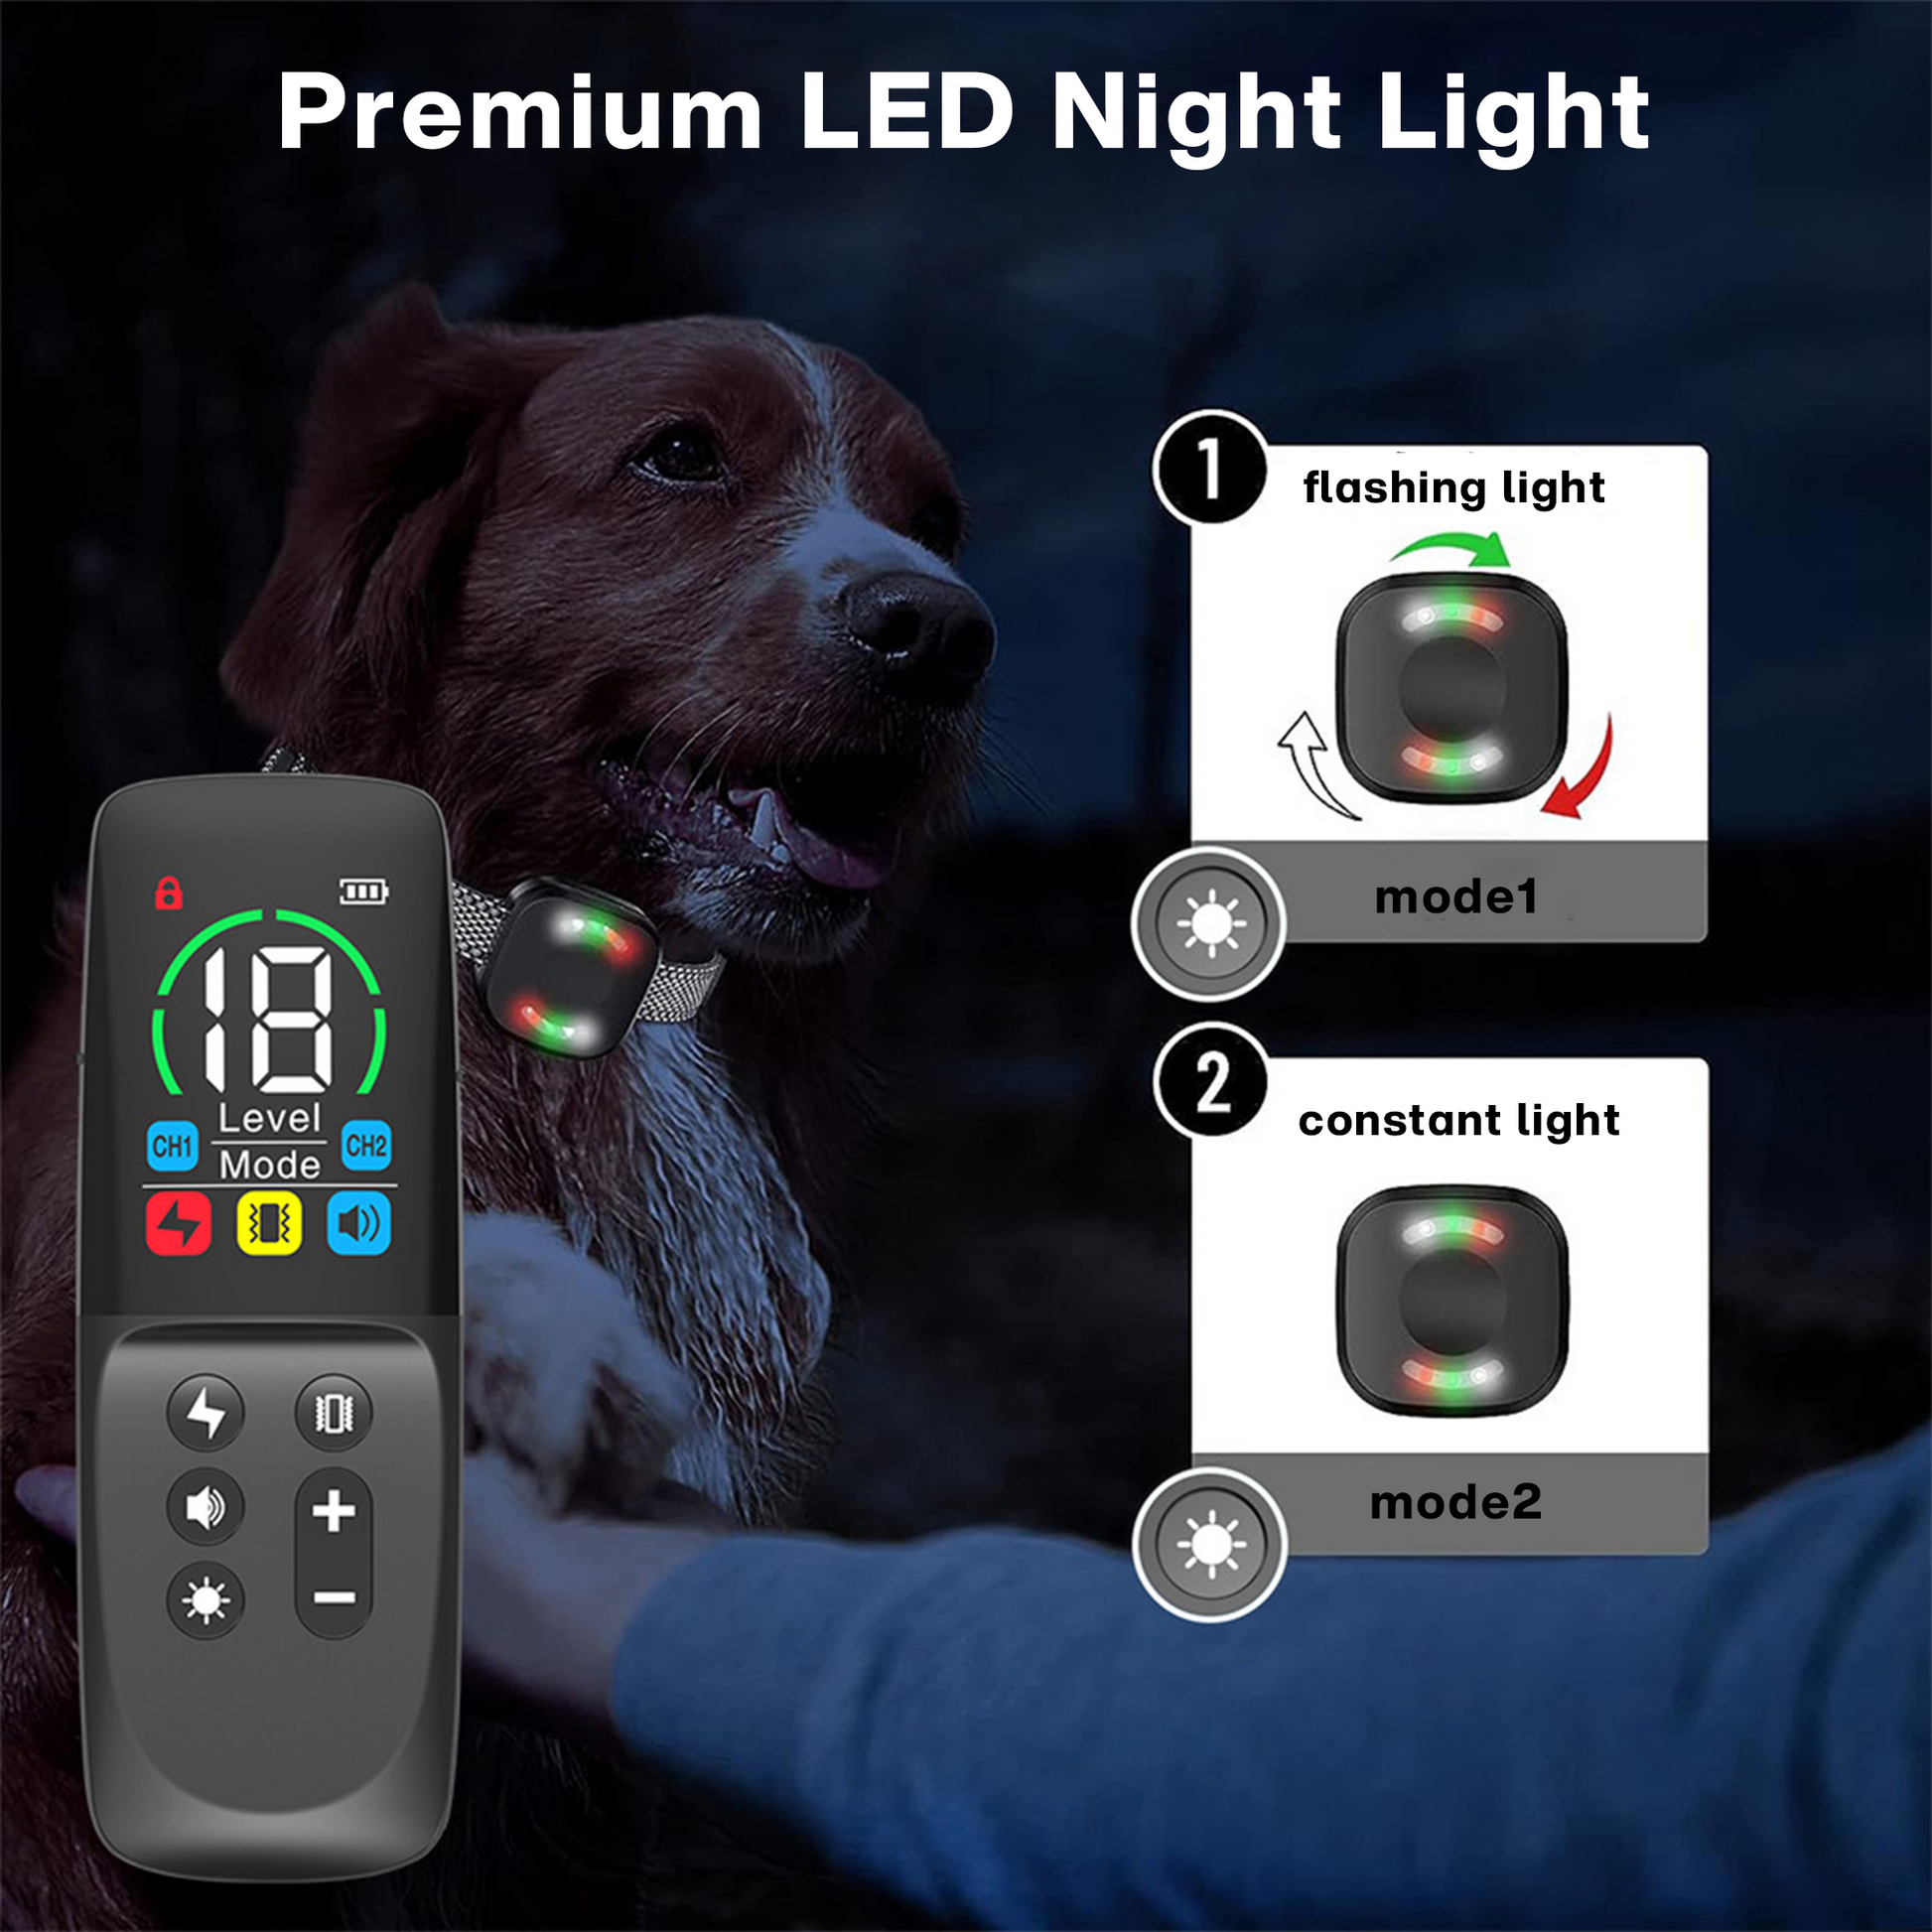 Pets Are Framily Dog Shock Collar - 2600 Ft Dog Training Collar with Premium LED Display Remote for 5-120lbs Small Medium Large Dogs Rechargeable Waterproof e Collar-Dog Training-Pets Are Framily